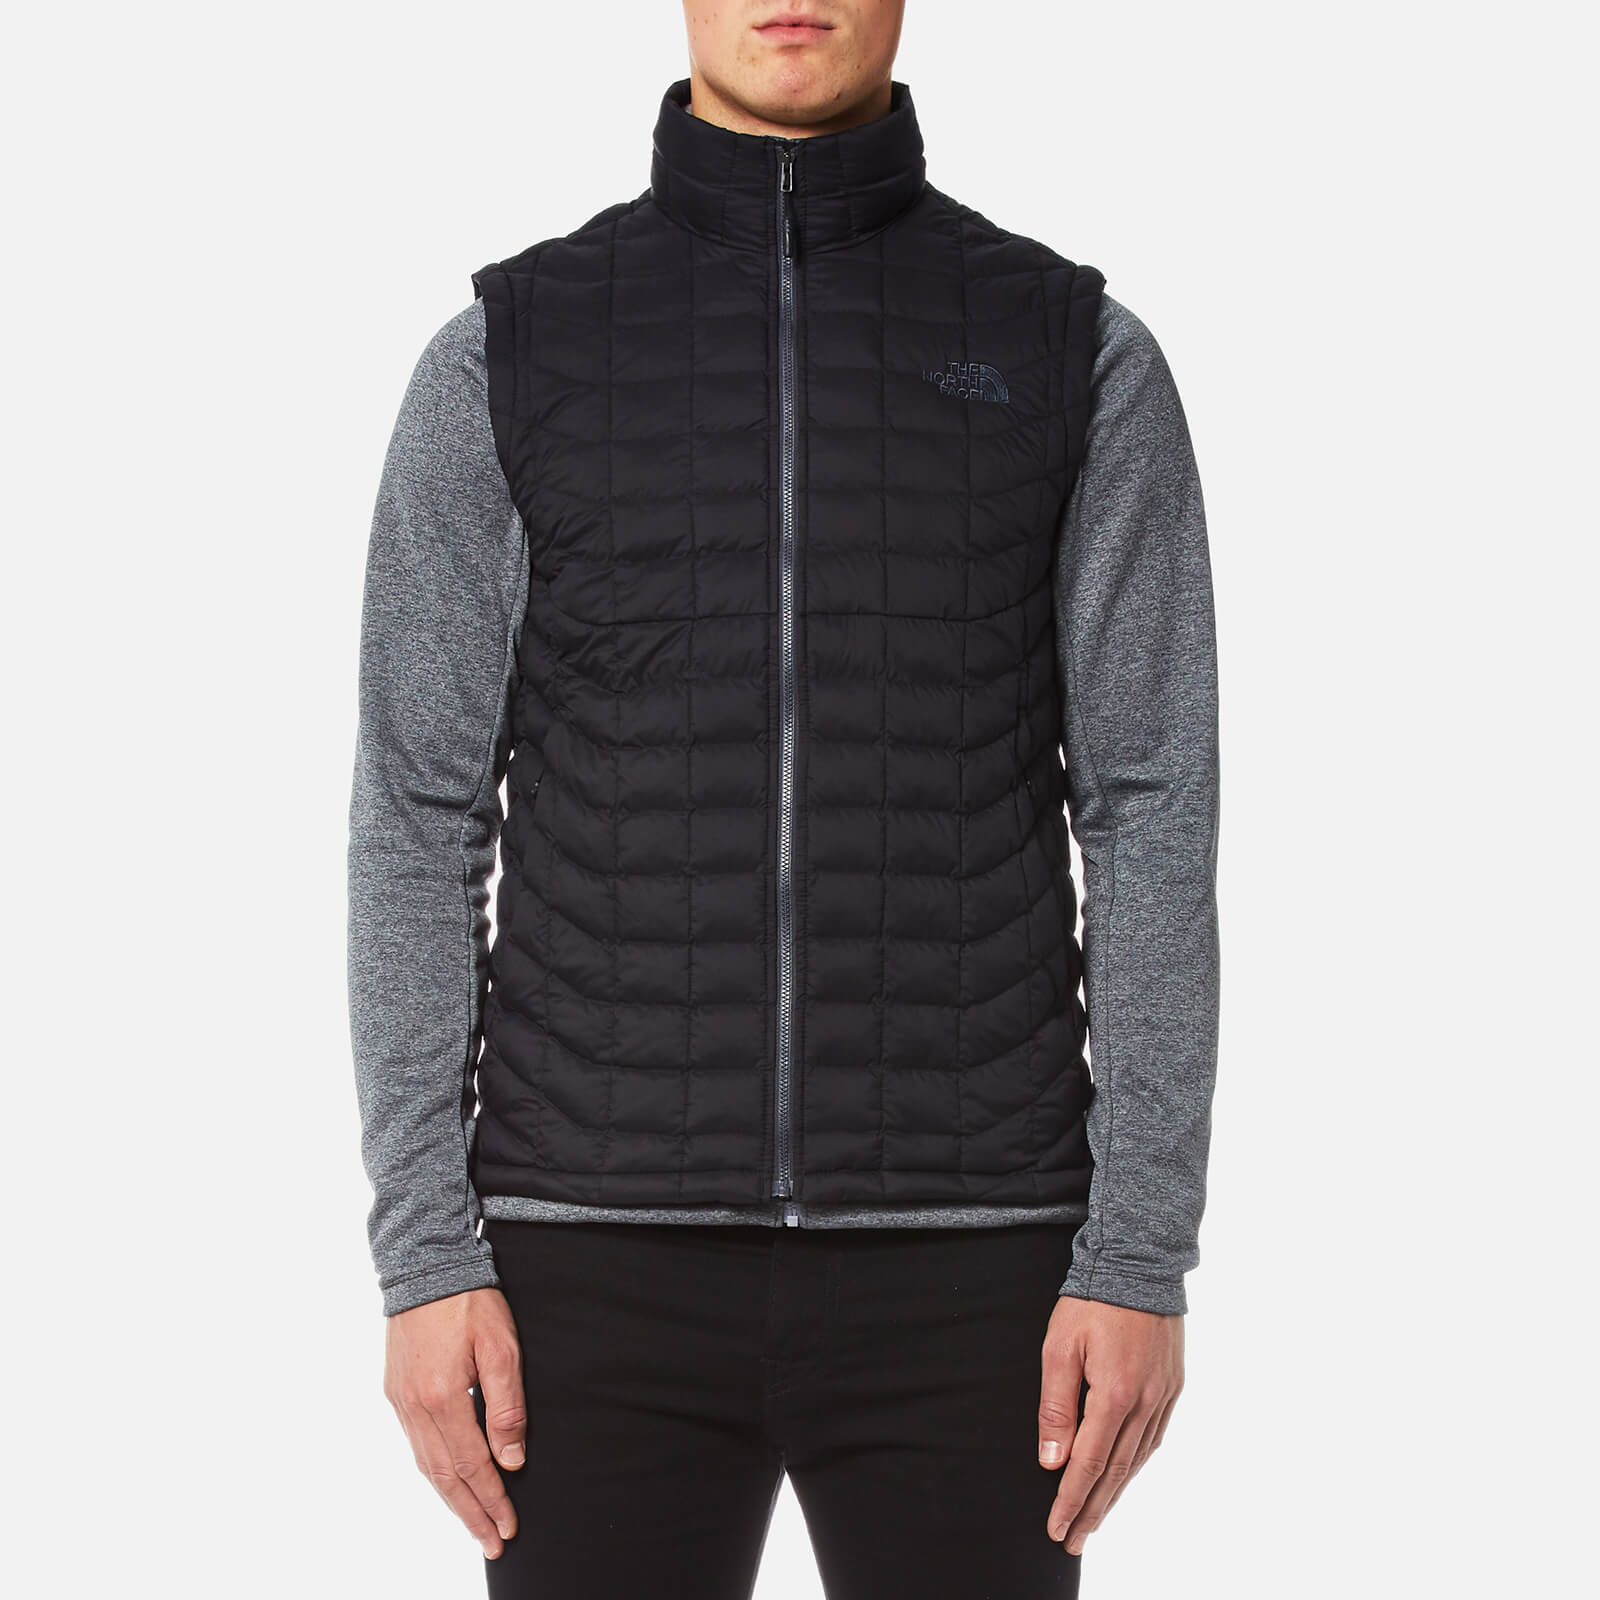 men's thermoball vest